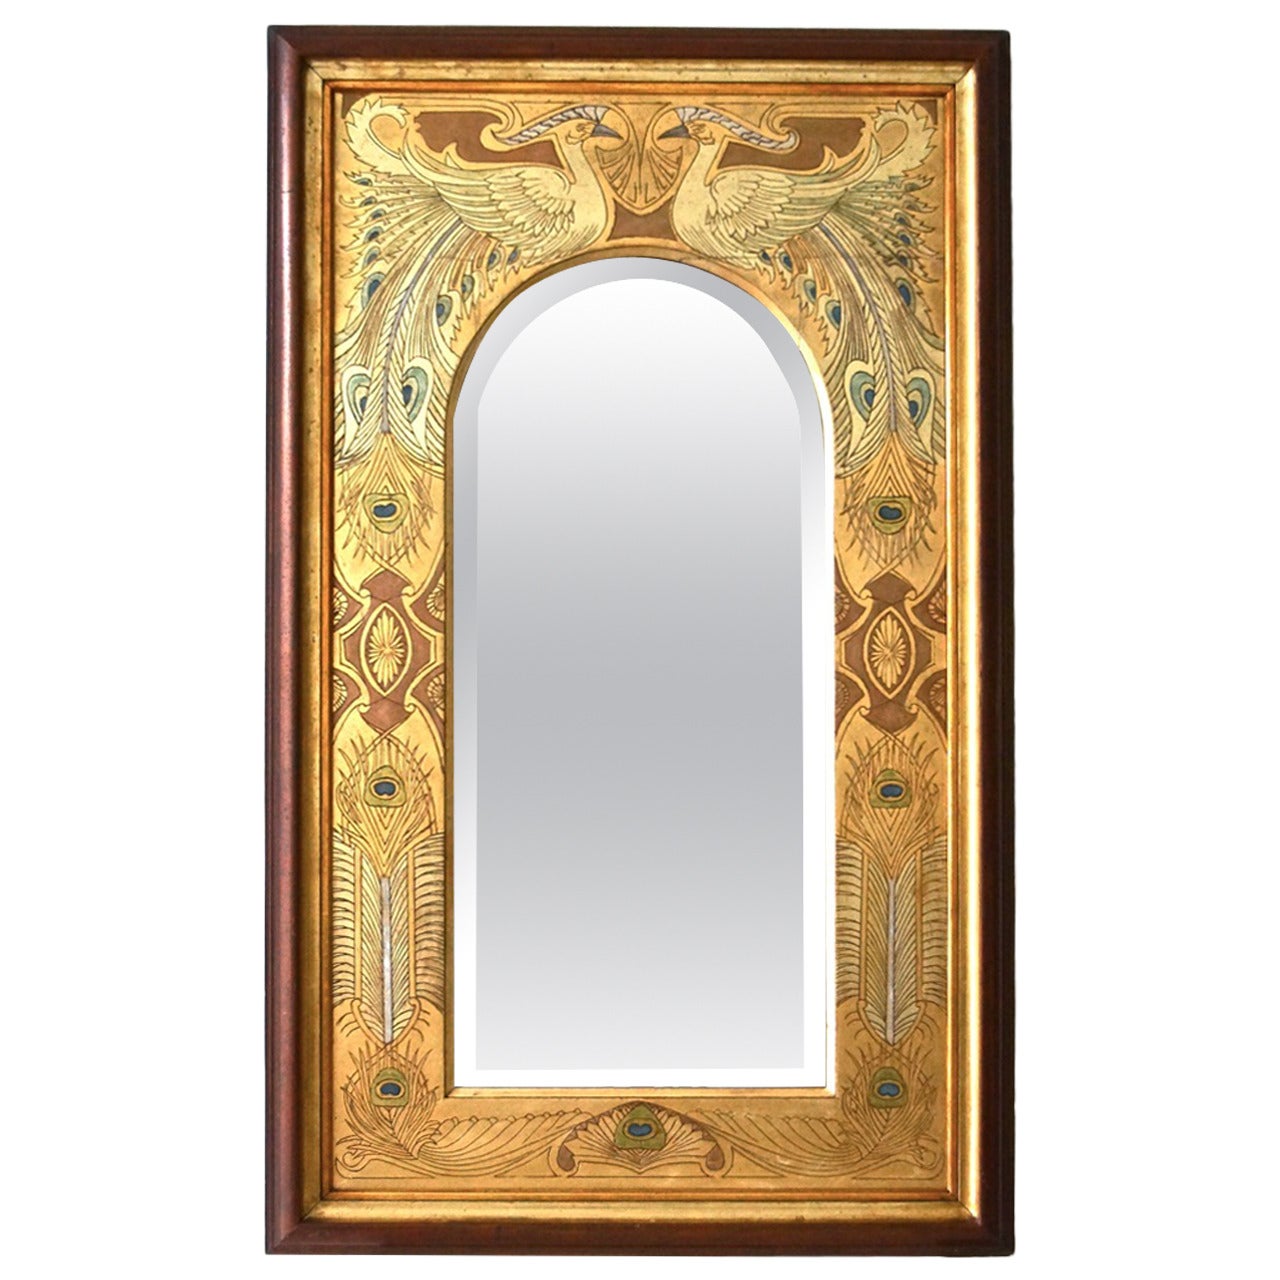 Spectacular Art Nouveau Mirror with Peacocks For Sale